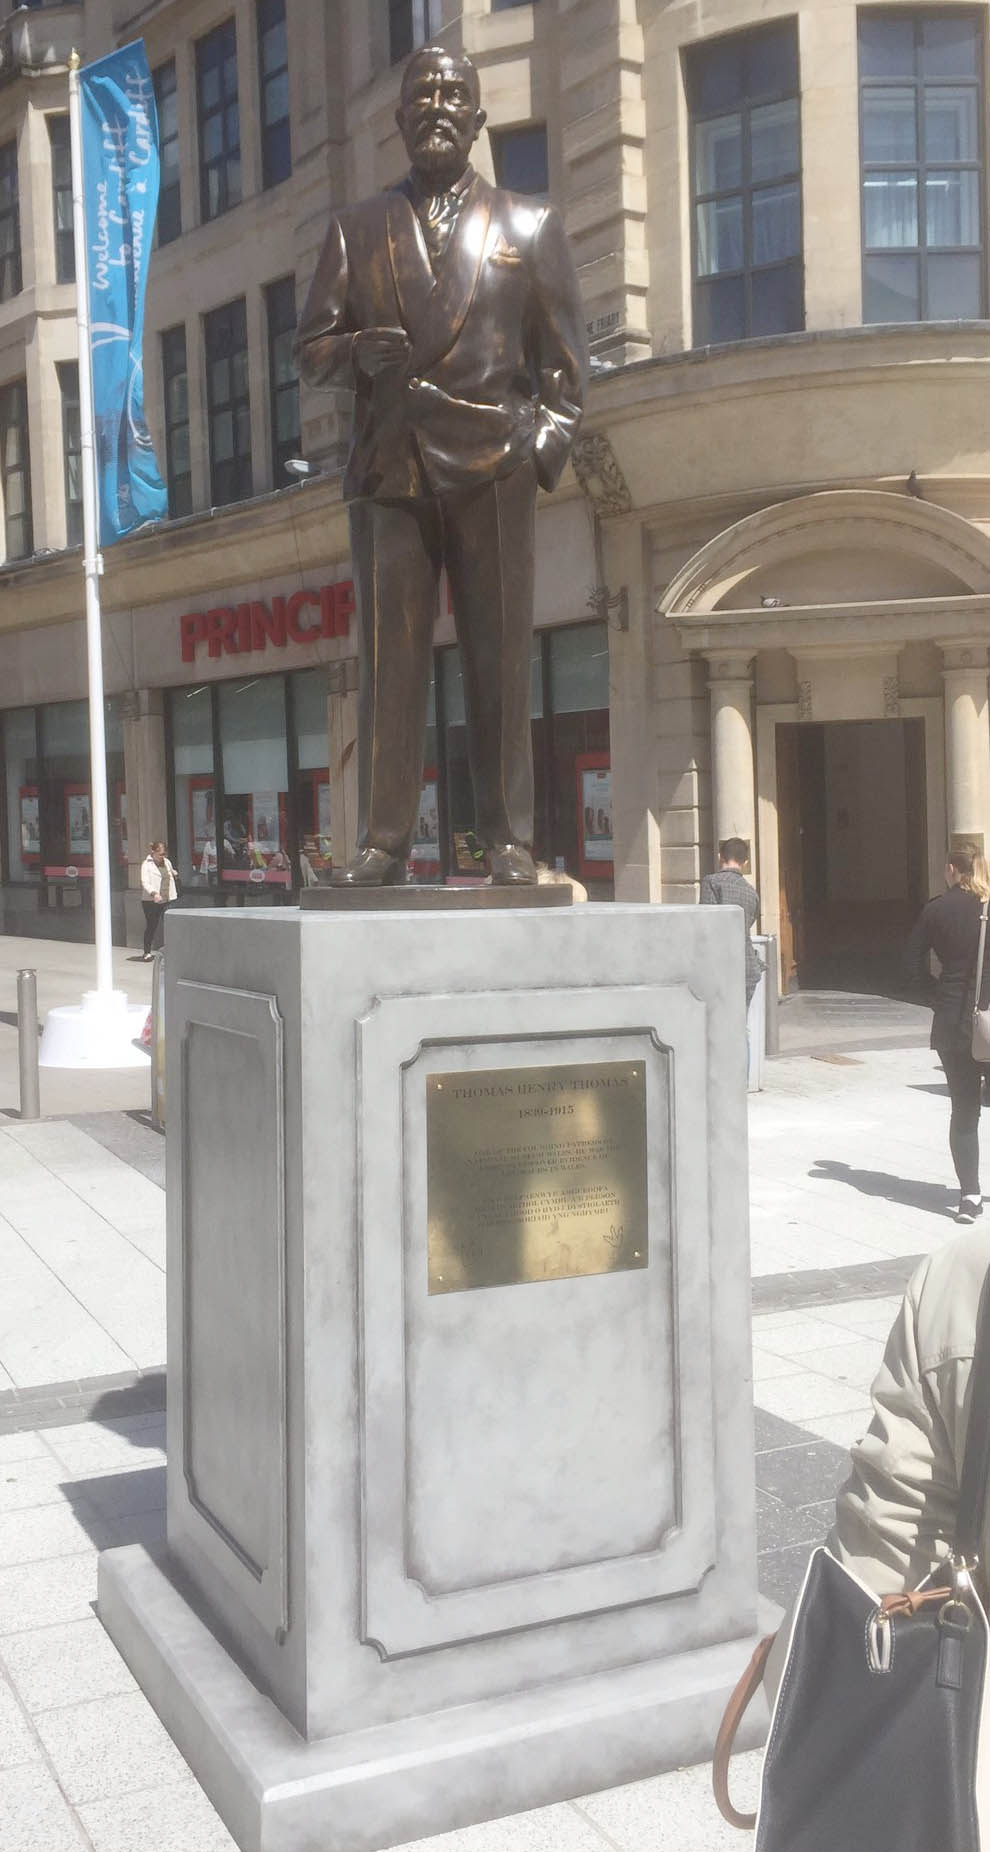 Statue on Cardiff's Queen Street